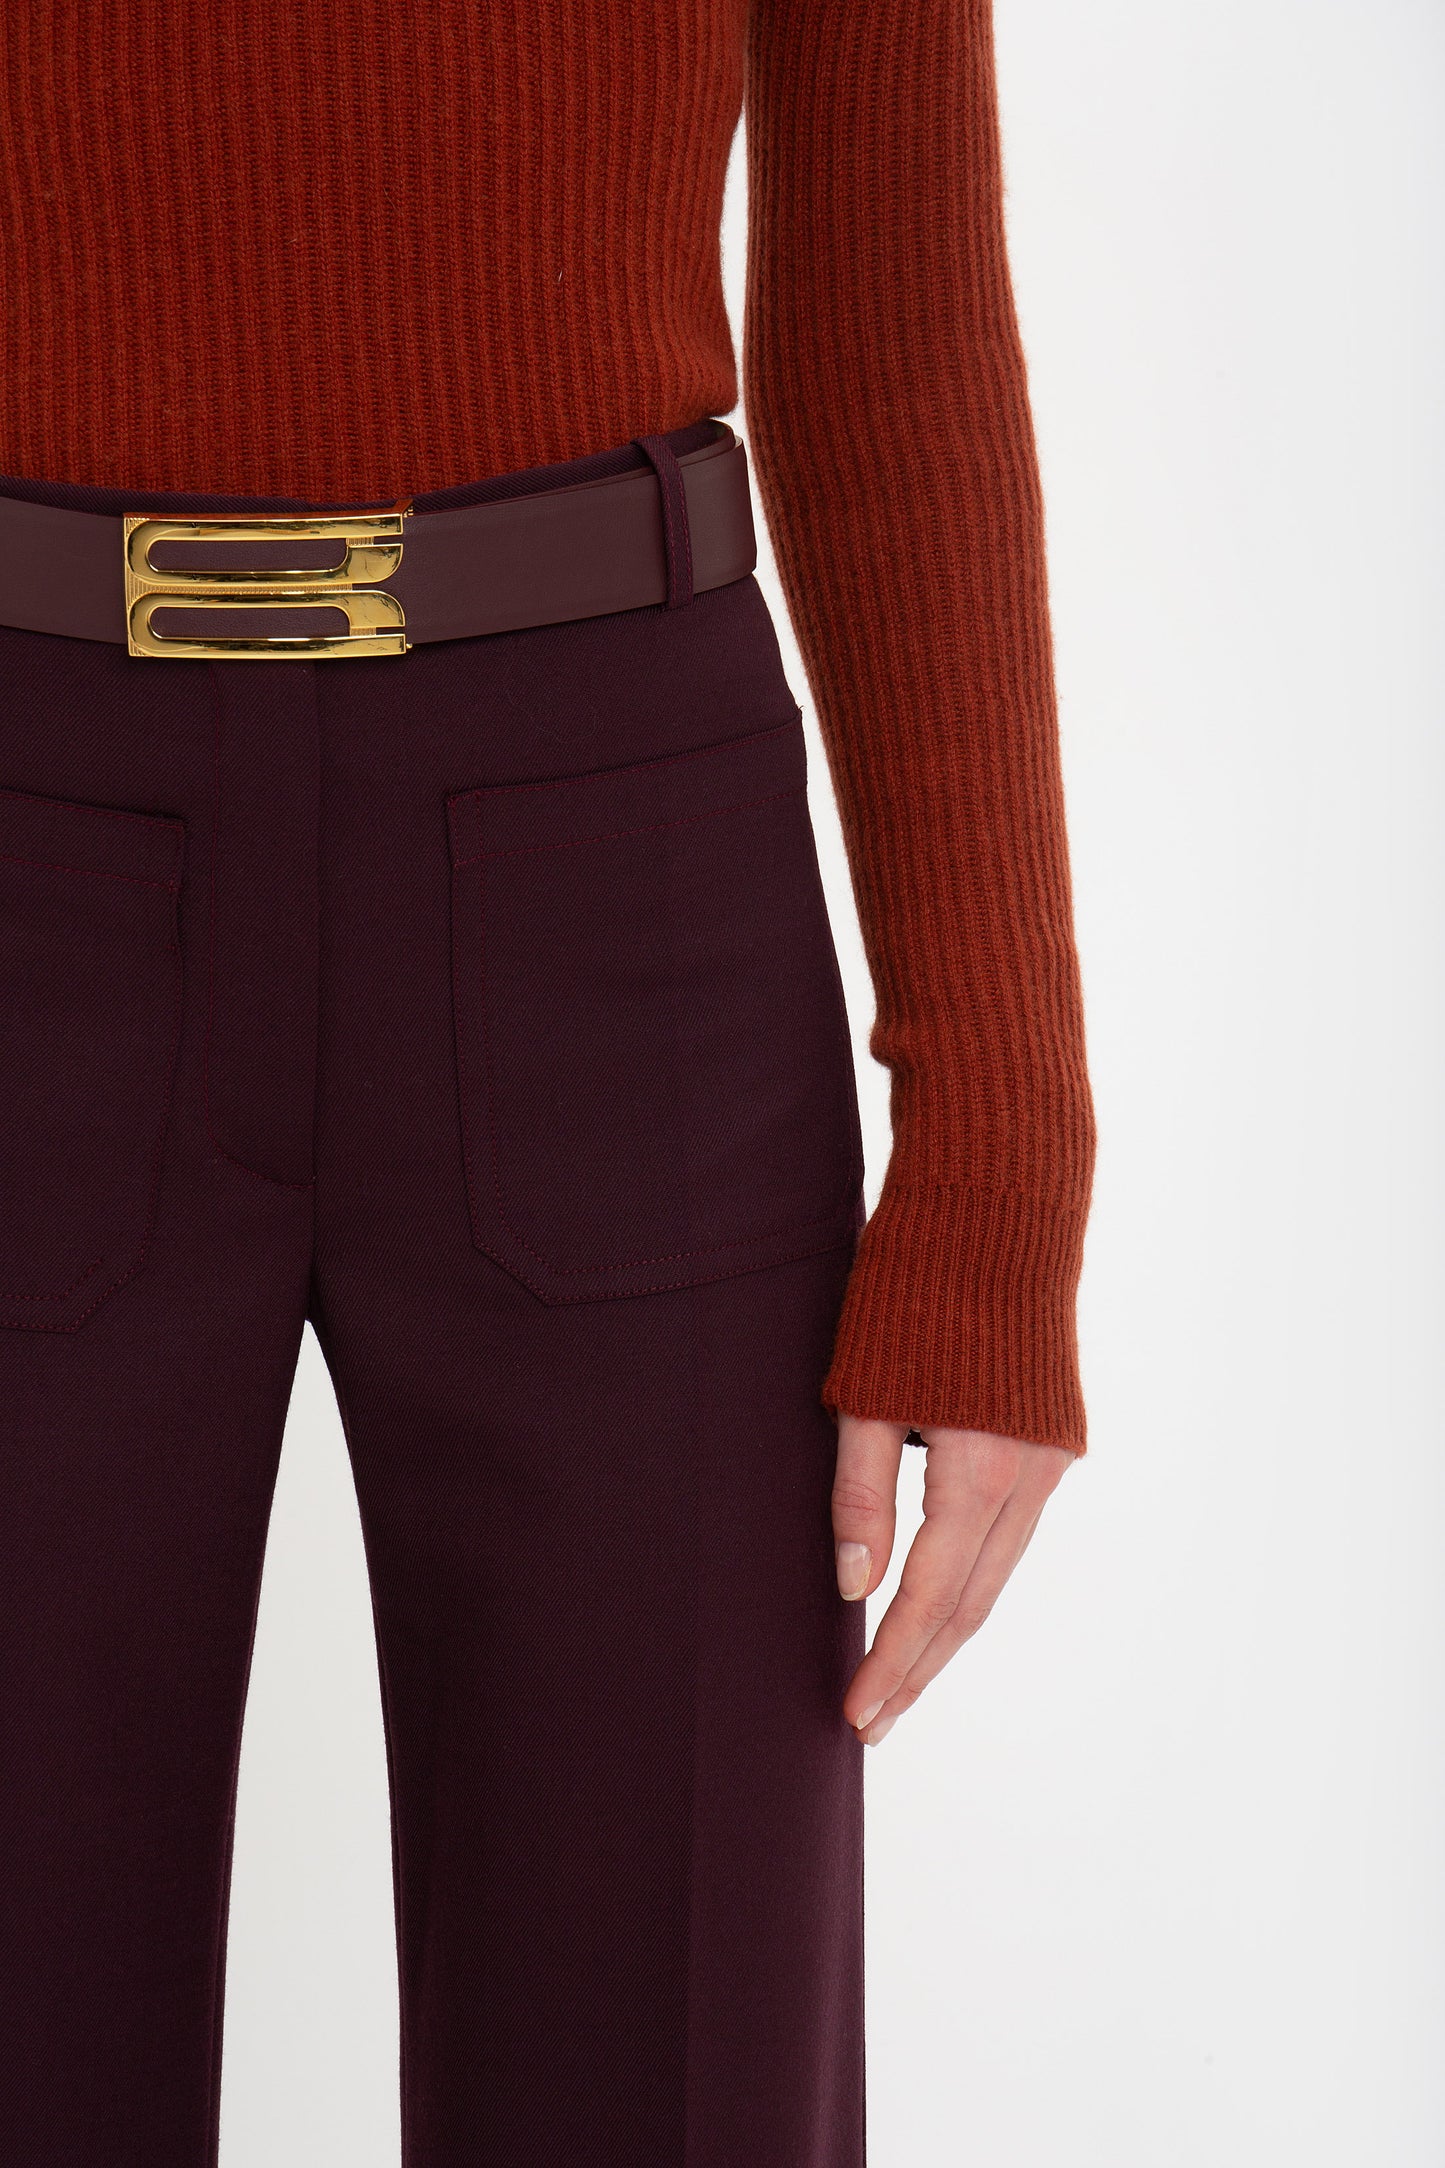 A person wearing a rust-colored ribbed sweater made of recycled wool, deep mahogany Victoria Beckham Alina Trouser In Deep Mahogany, and a burgundy belt with a gold buckle stands against a plain background. The right arm is slightly bent.